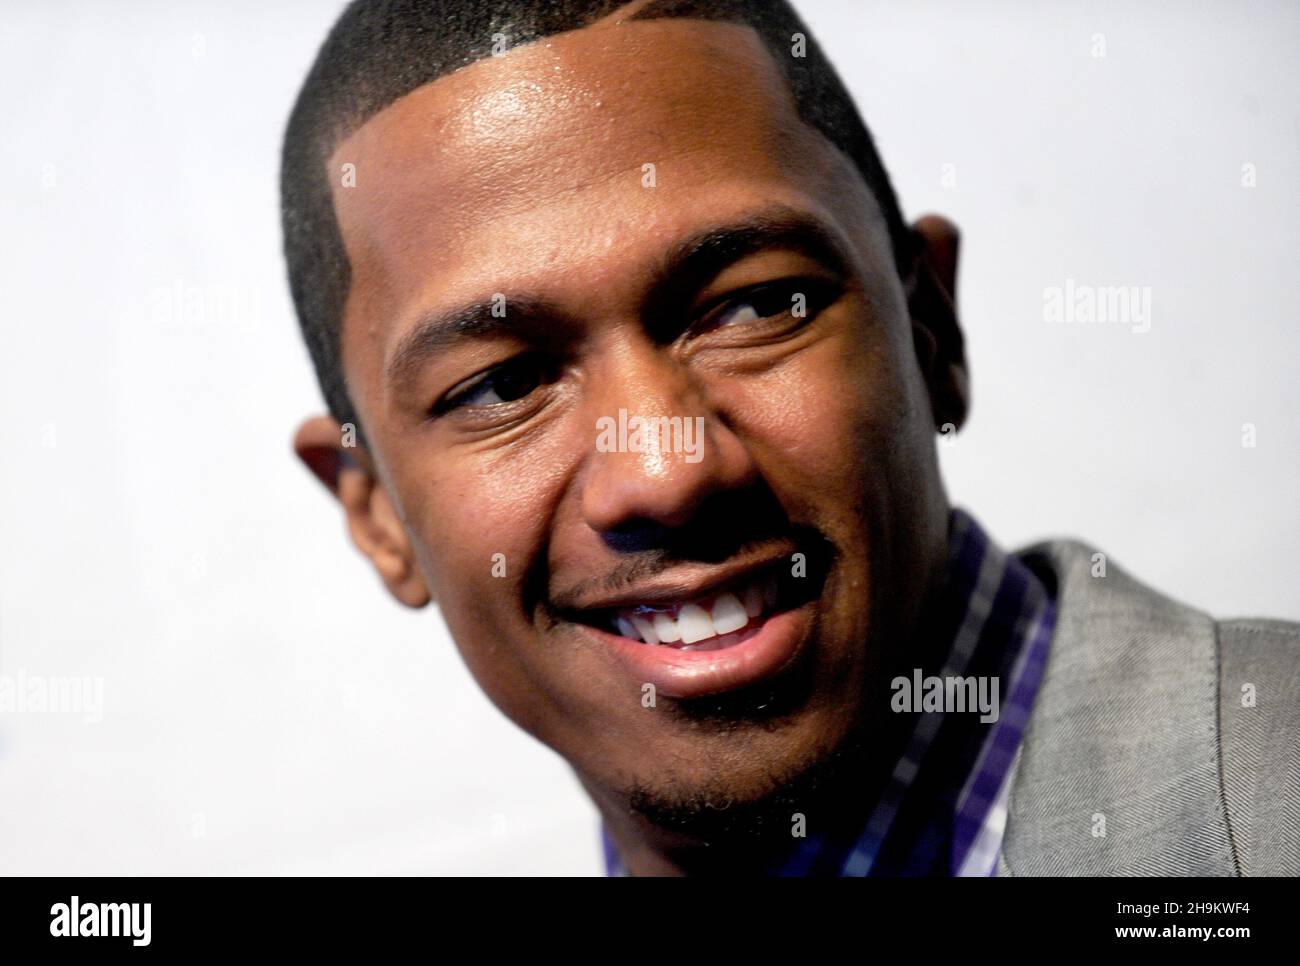 Manhattan, United States Of America. 30th May, 2013. SMG Nick Cannon NY1 Leadership Awards 052813 09.JPG NEW YORK, NY - MAY 28: Nick Cannon attends the UJA-Federation Of New York Entertainment, Media And Communications Leadership Awards Dinner at Pier Sixty at Chelsea Piers on May 28, 2013 in New York City. People: Nick Cannon Credit: Storms Media Group/Alamy Live News Stock Photo